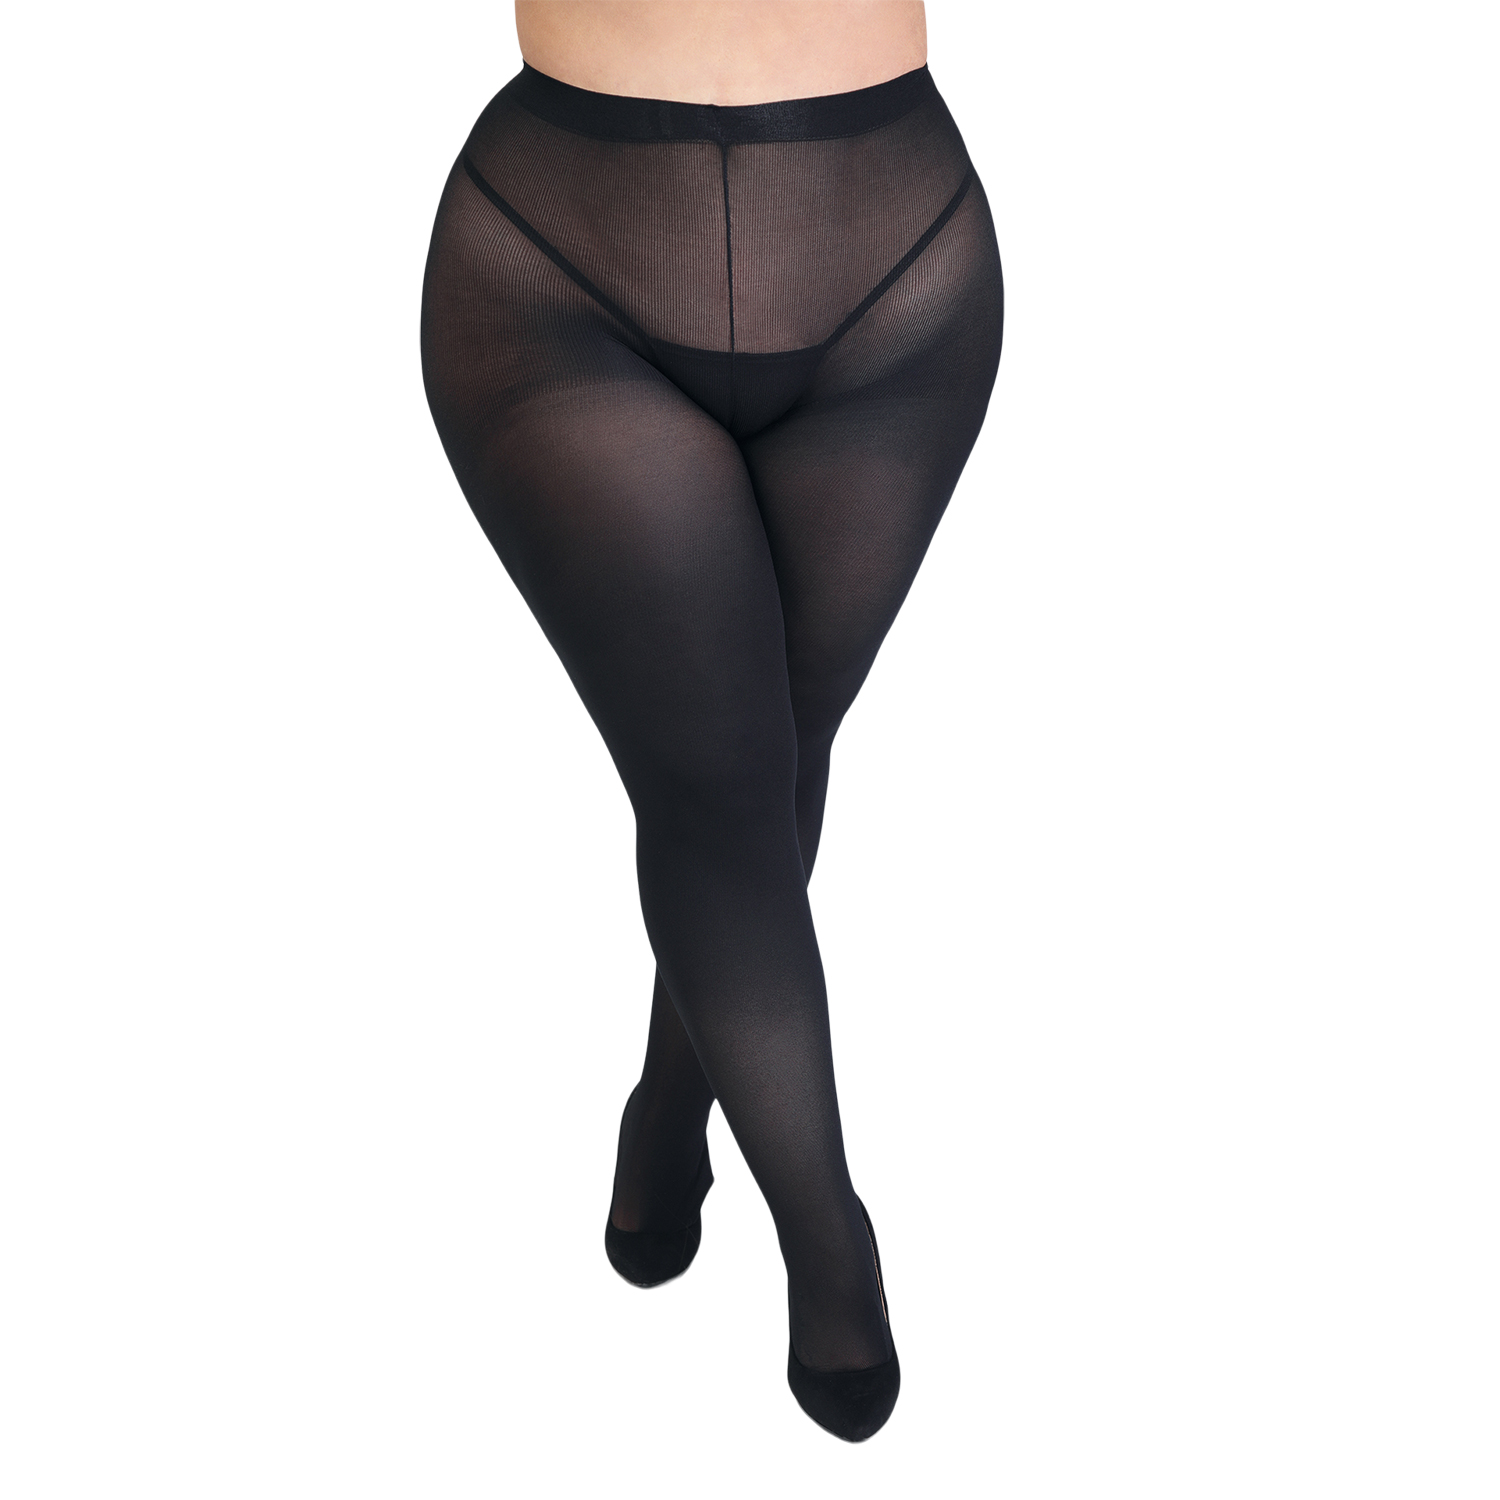 Fifty Shades of Grey Captivate Större Storlek Spanking Tights   - Svart - One Size Queen